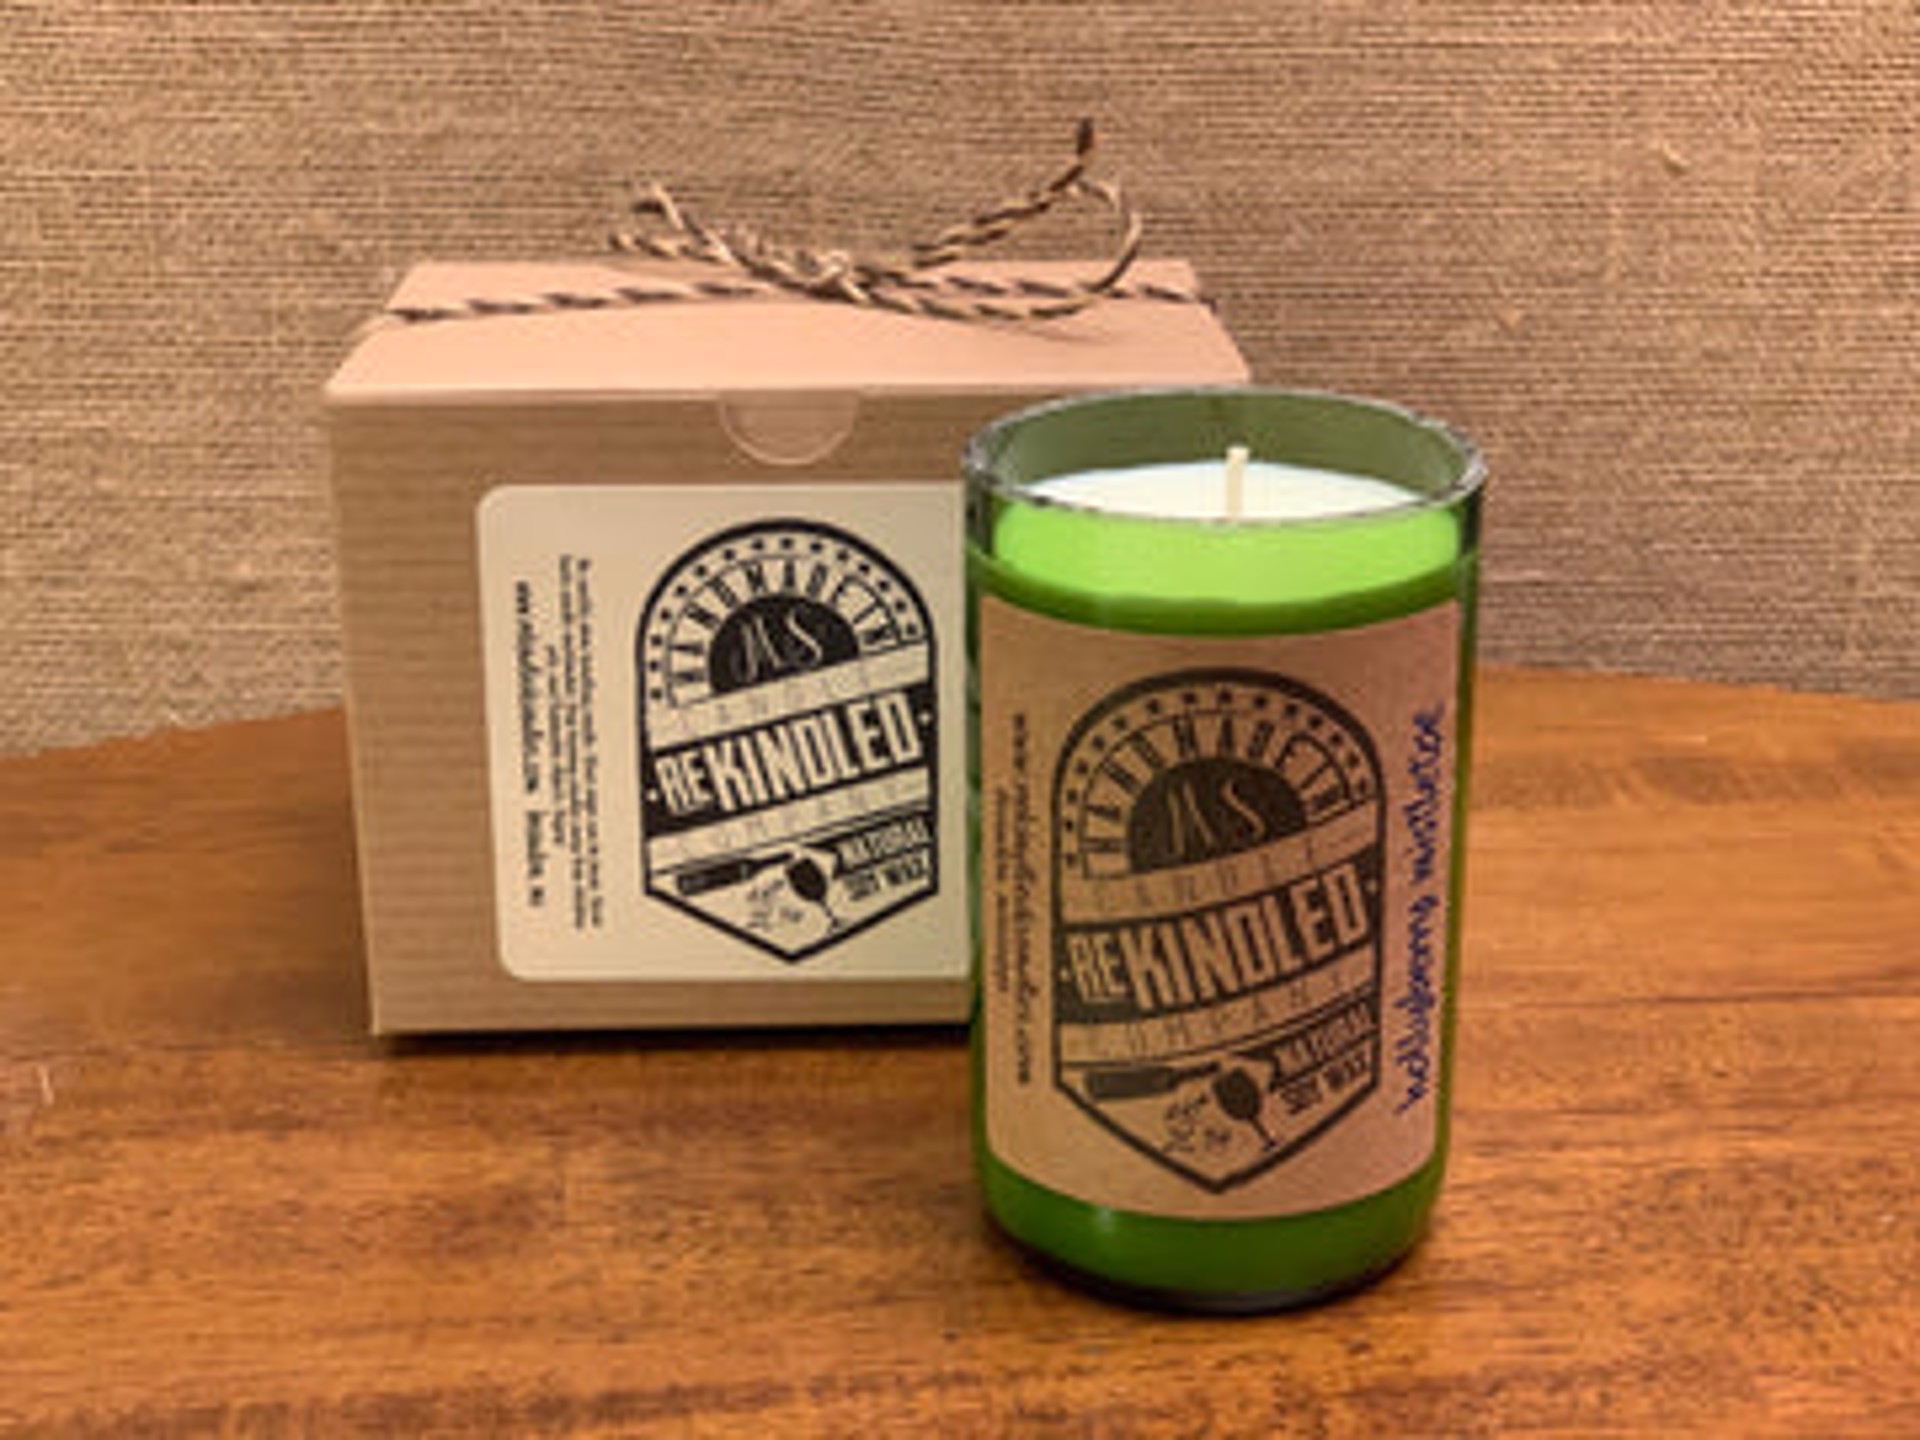 Delta Cotton Wine Bottle Candle by re-kindled candle company